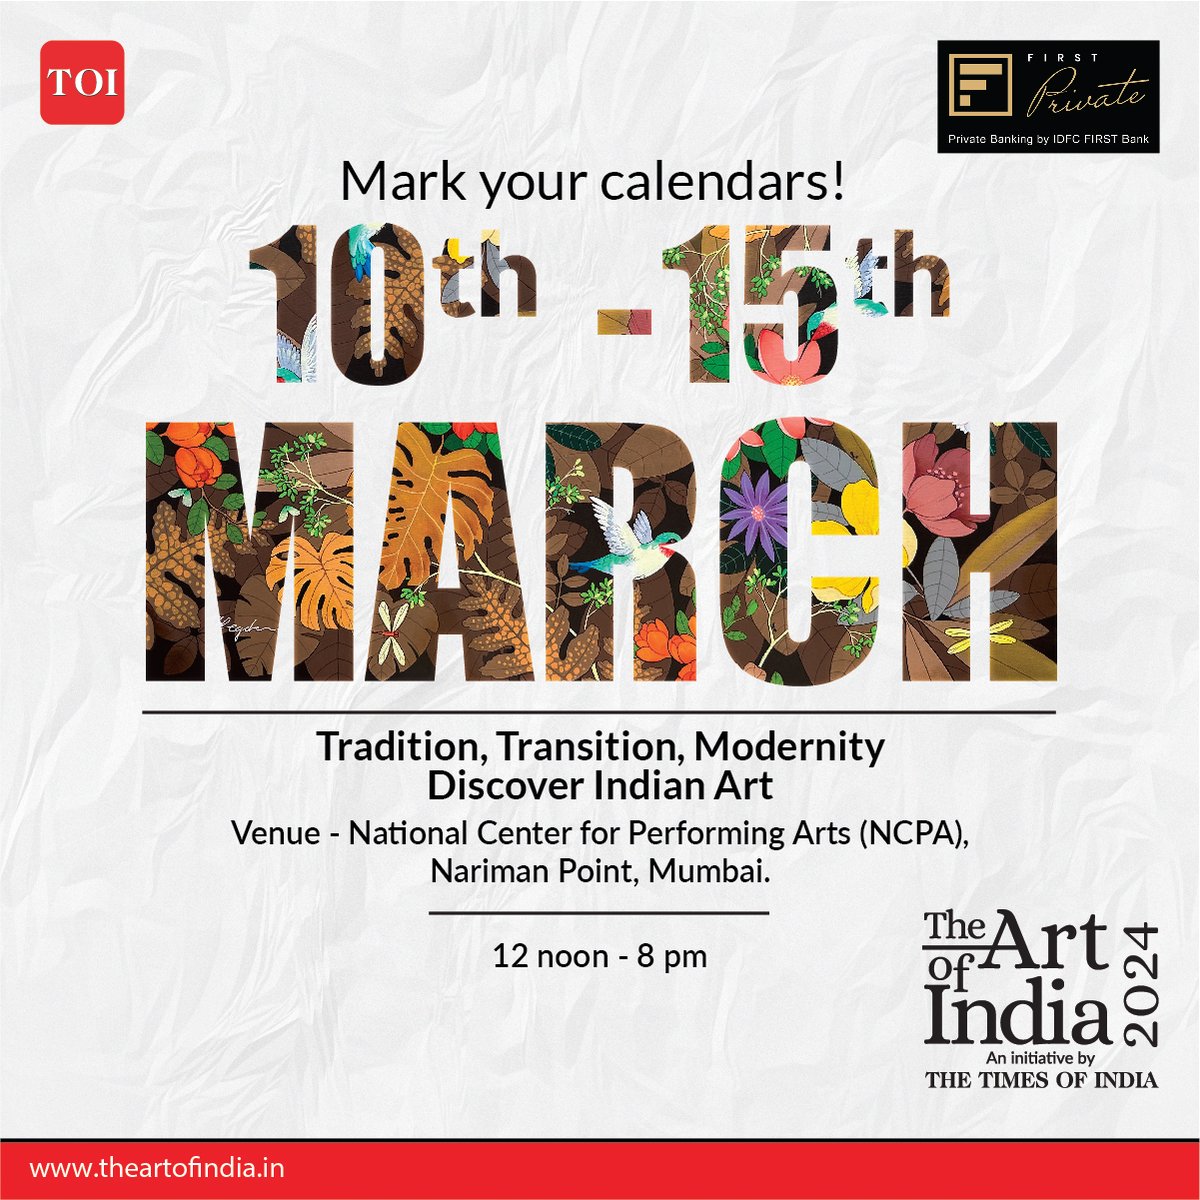 Experience best of Indian art, brought to you by THE TIMES OF INDIA

Curated by Alka Pande, this event celebrates our rich artistic heritage from March 10th to 15th at the National Center for Performing Arts (NCPA), Mumbai
#TheArtOfIndia2024 #TheArtOfIndia #TOI #TOITheArtOfIndia